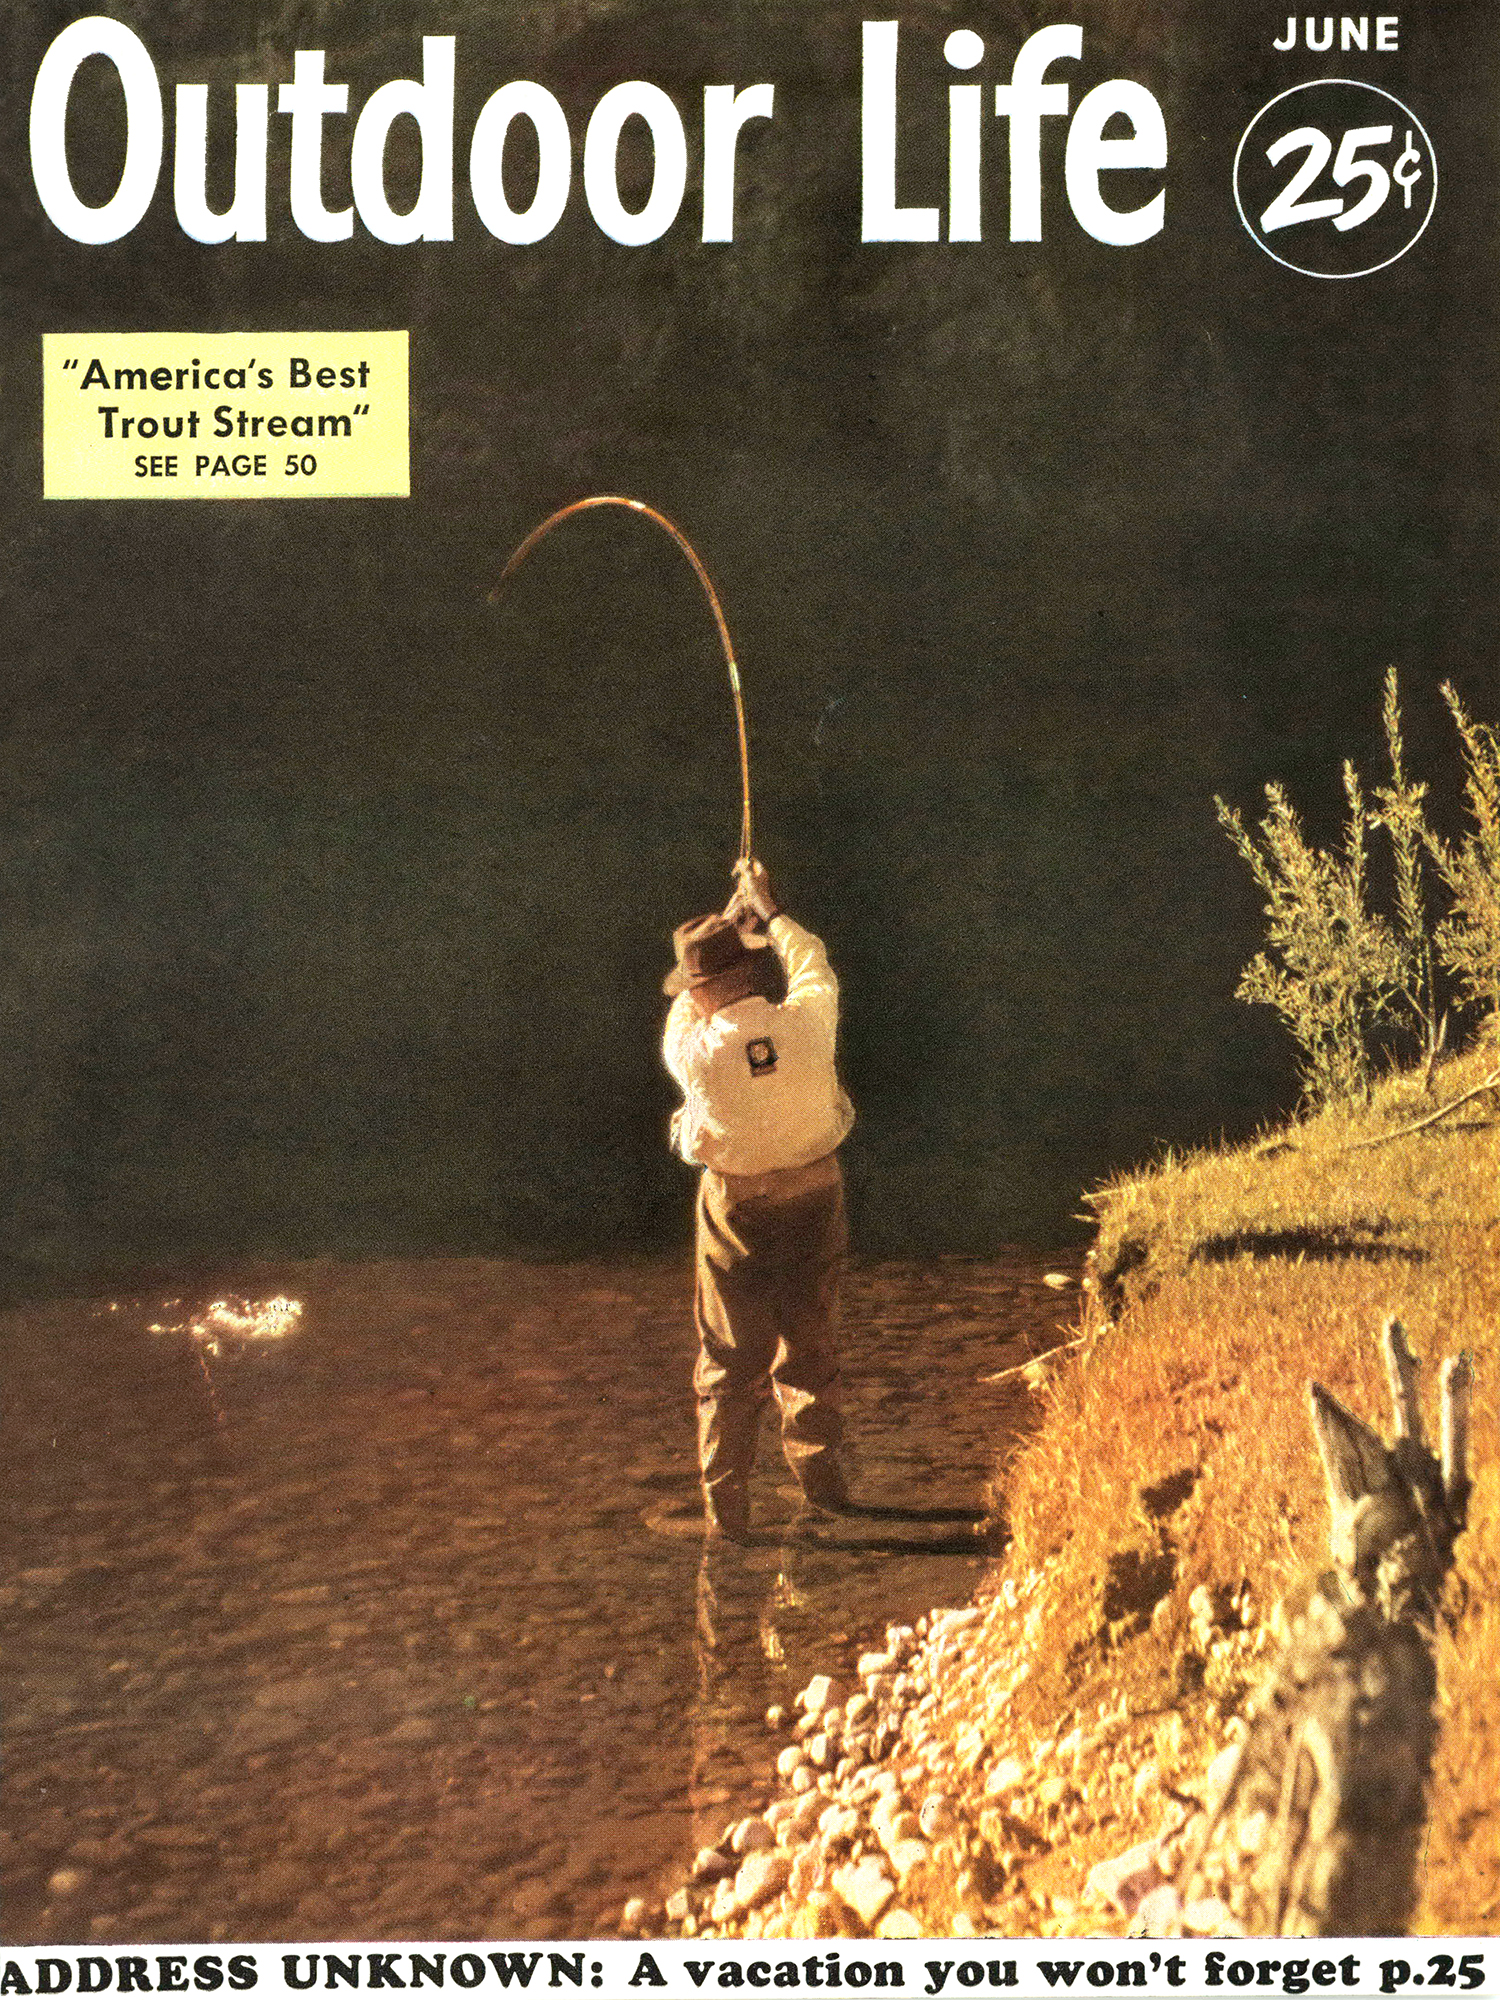 Angler stands in shallow water and fights fish further out in water; composed magazine cover from June 1953